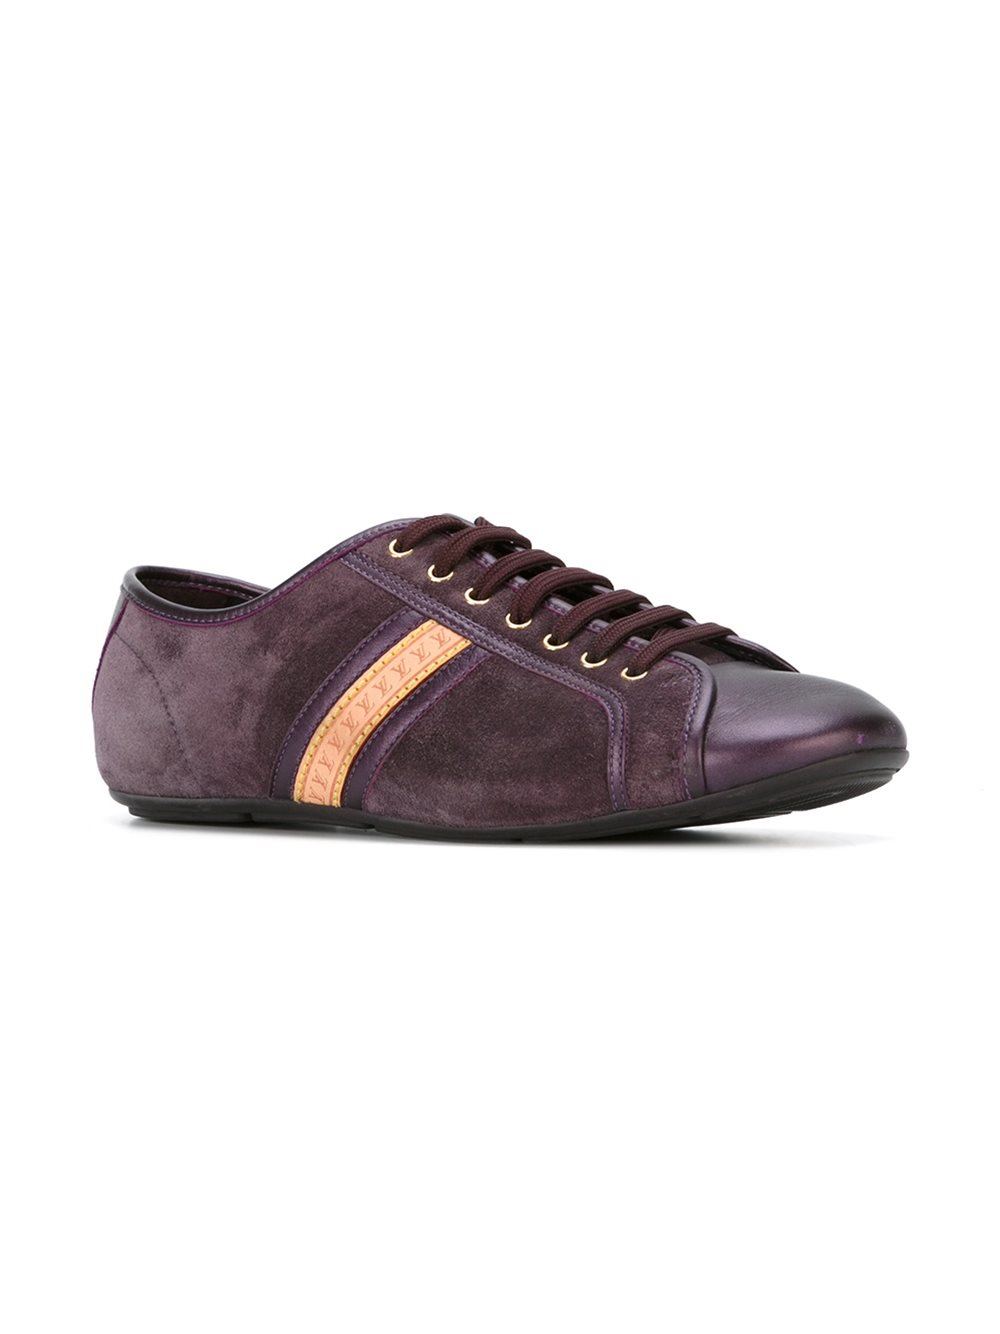 Louis Vuitton Purple Suede And Patent Leather Run Away Low Top Sneakers  Size 39.5 Louis Vuitton